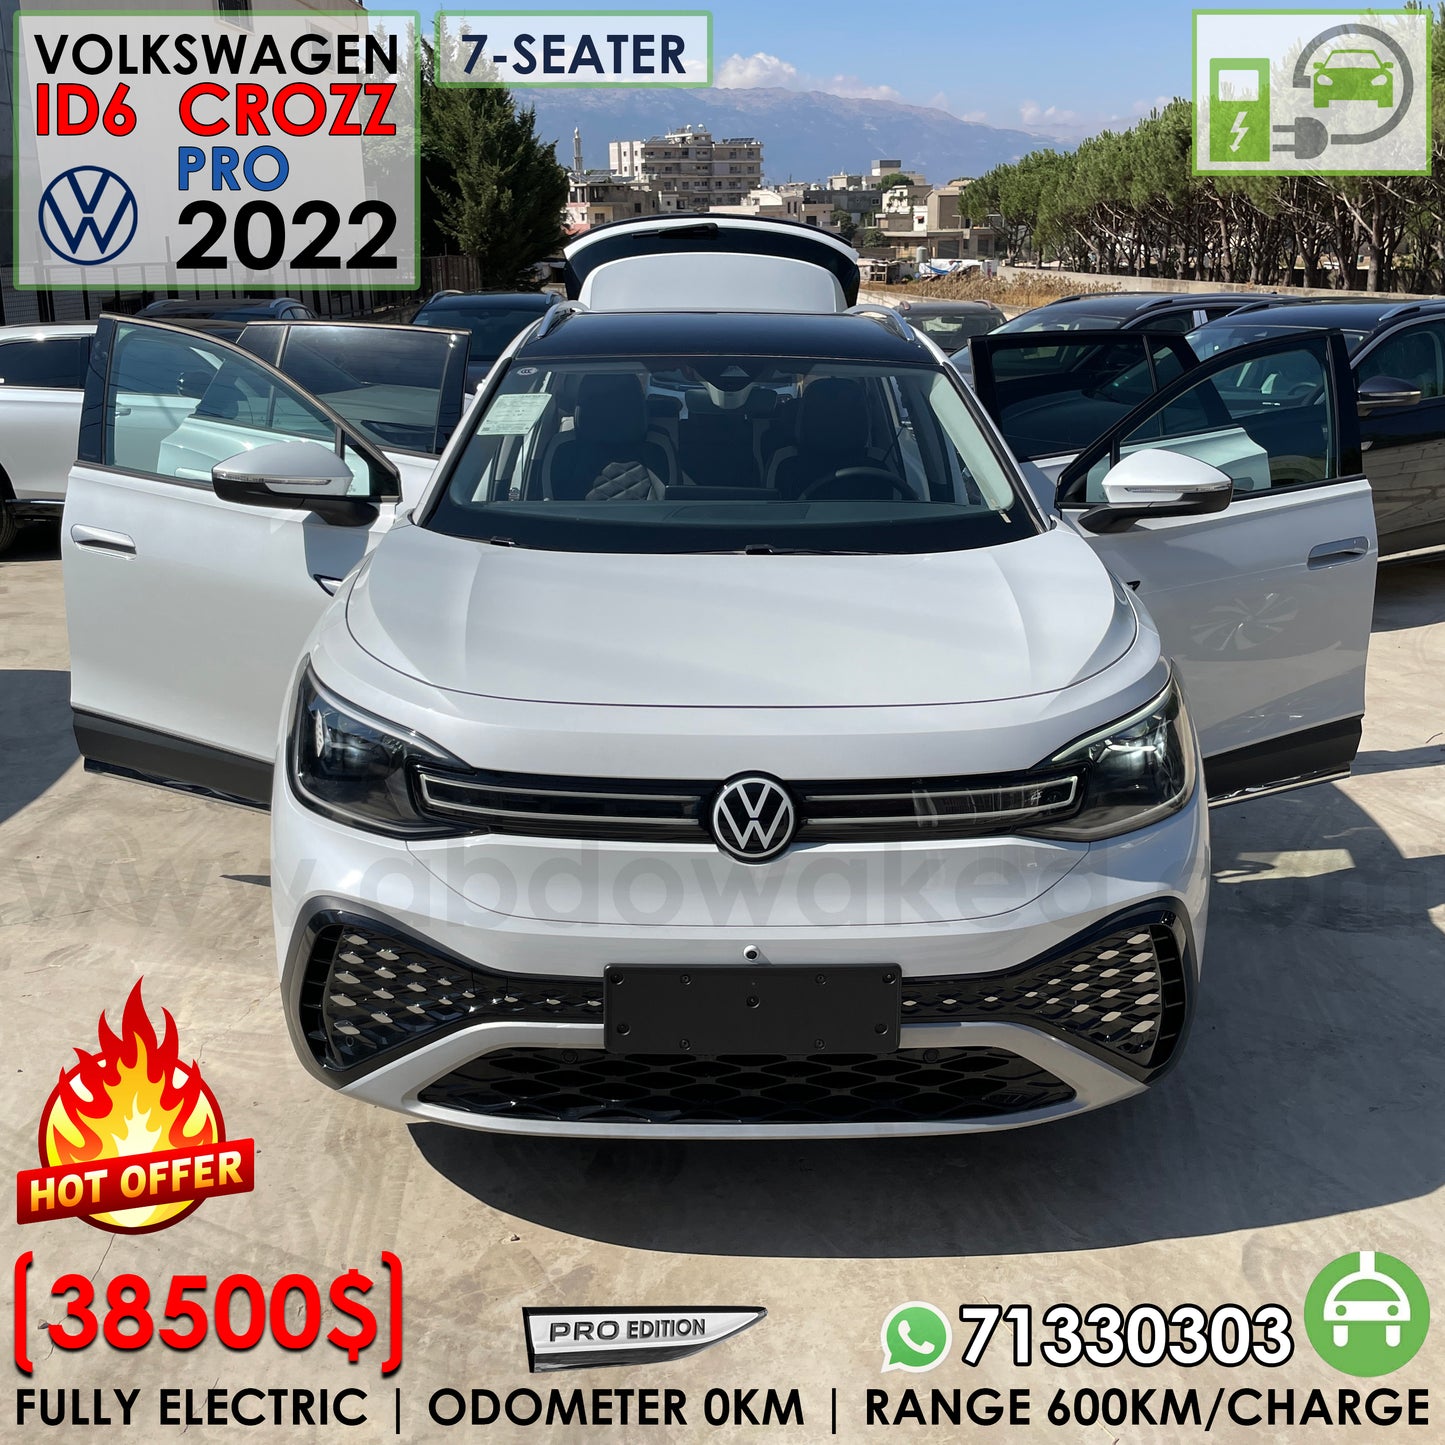 VW ID6 Crozz Pro 2022 7-Seater White Color 600km Range/Charge Fully Electric Car (New - 0KM)